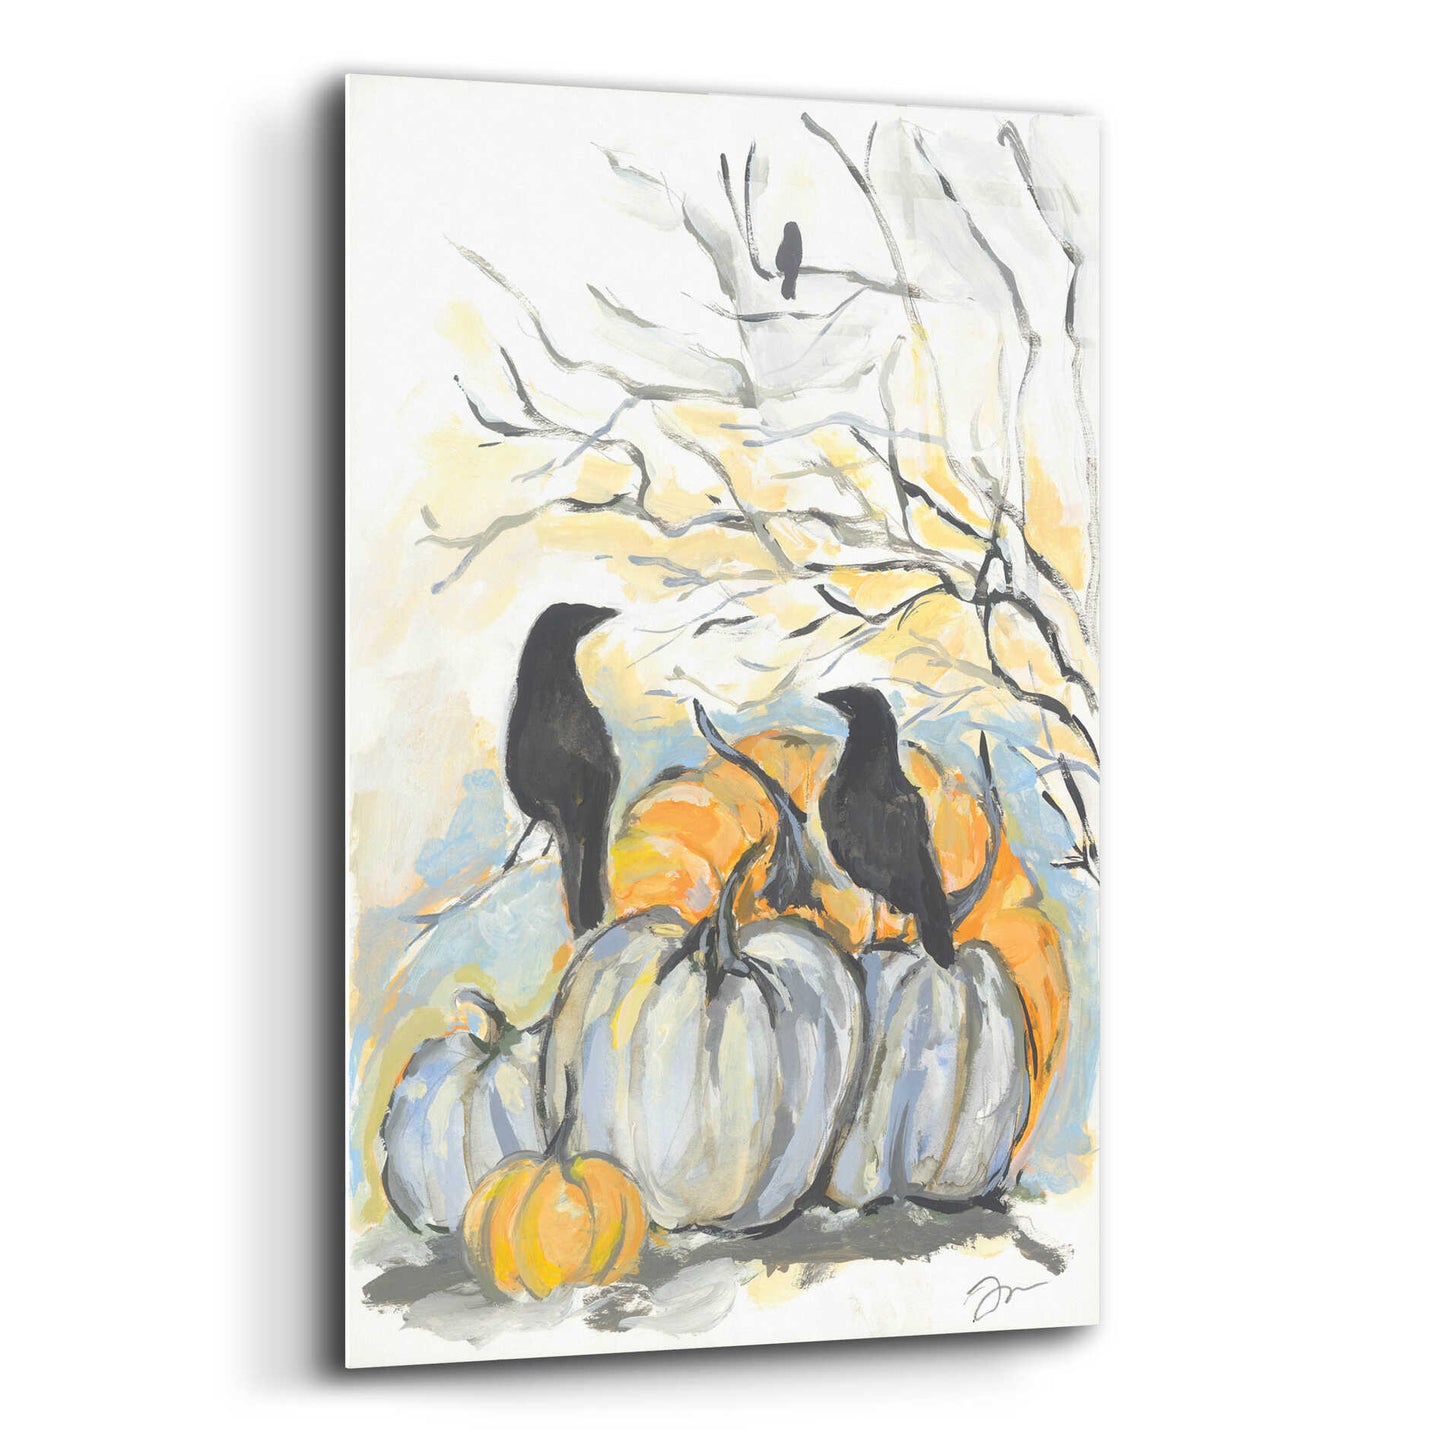 Epic Art 'Crows in the Pumpkin Patch' by Jessica Mingo, Acrylic Glass Wall Art,12x16